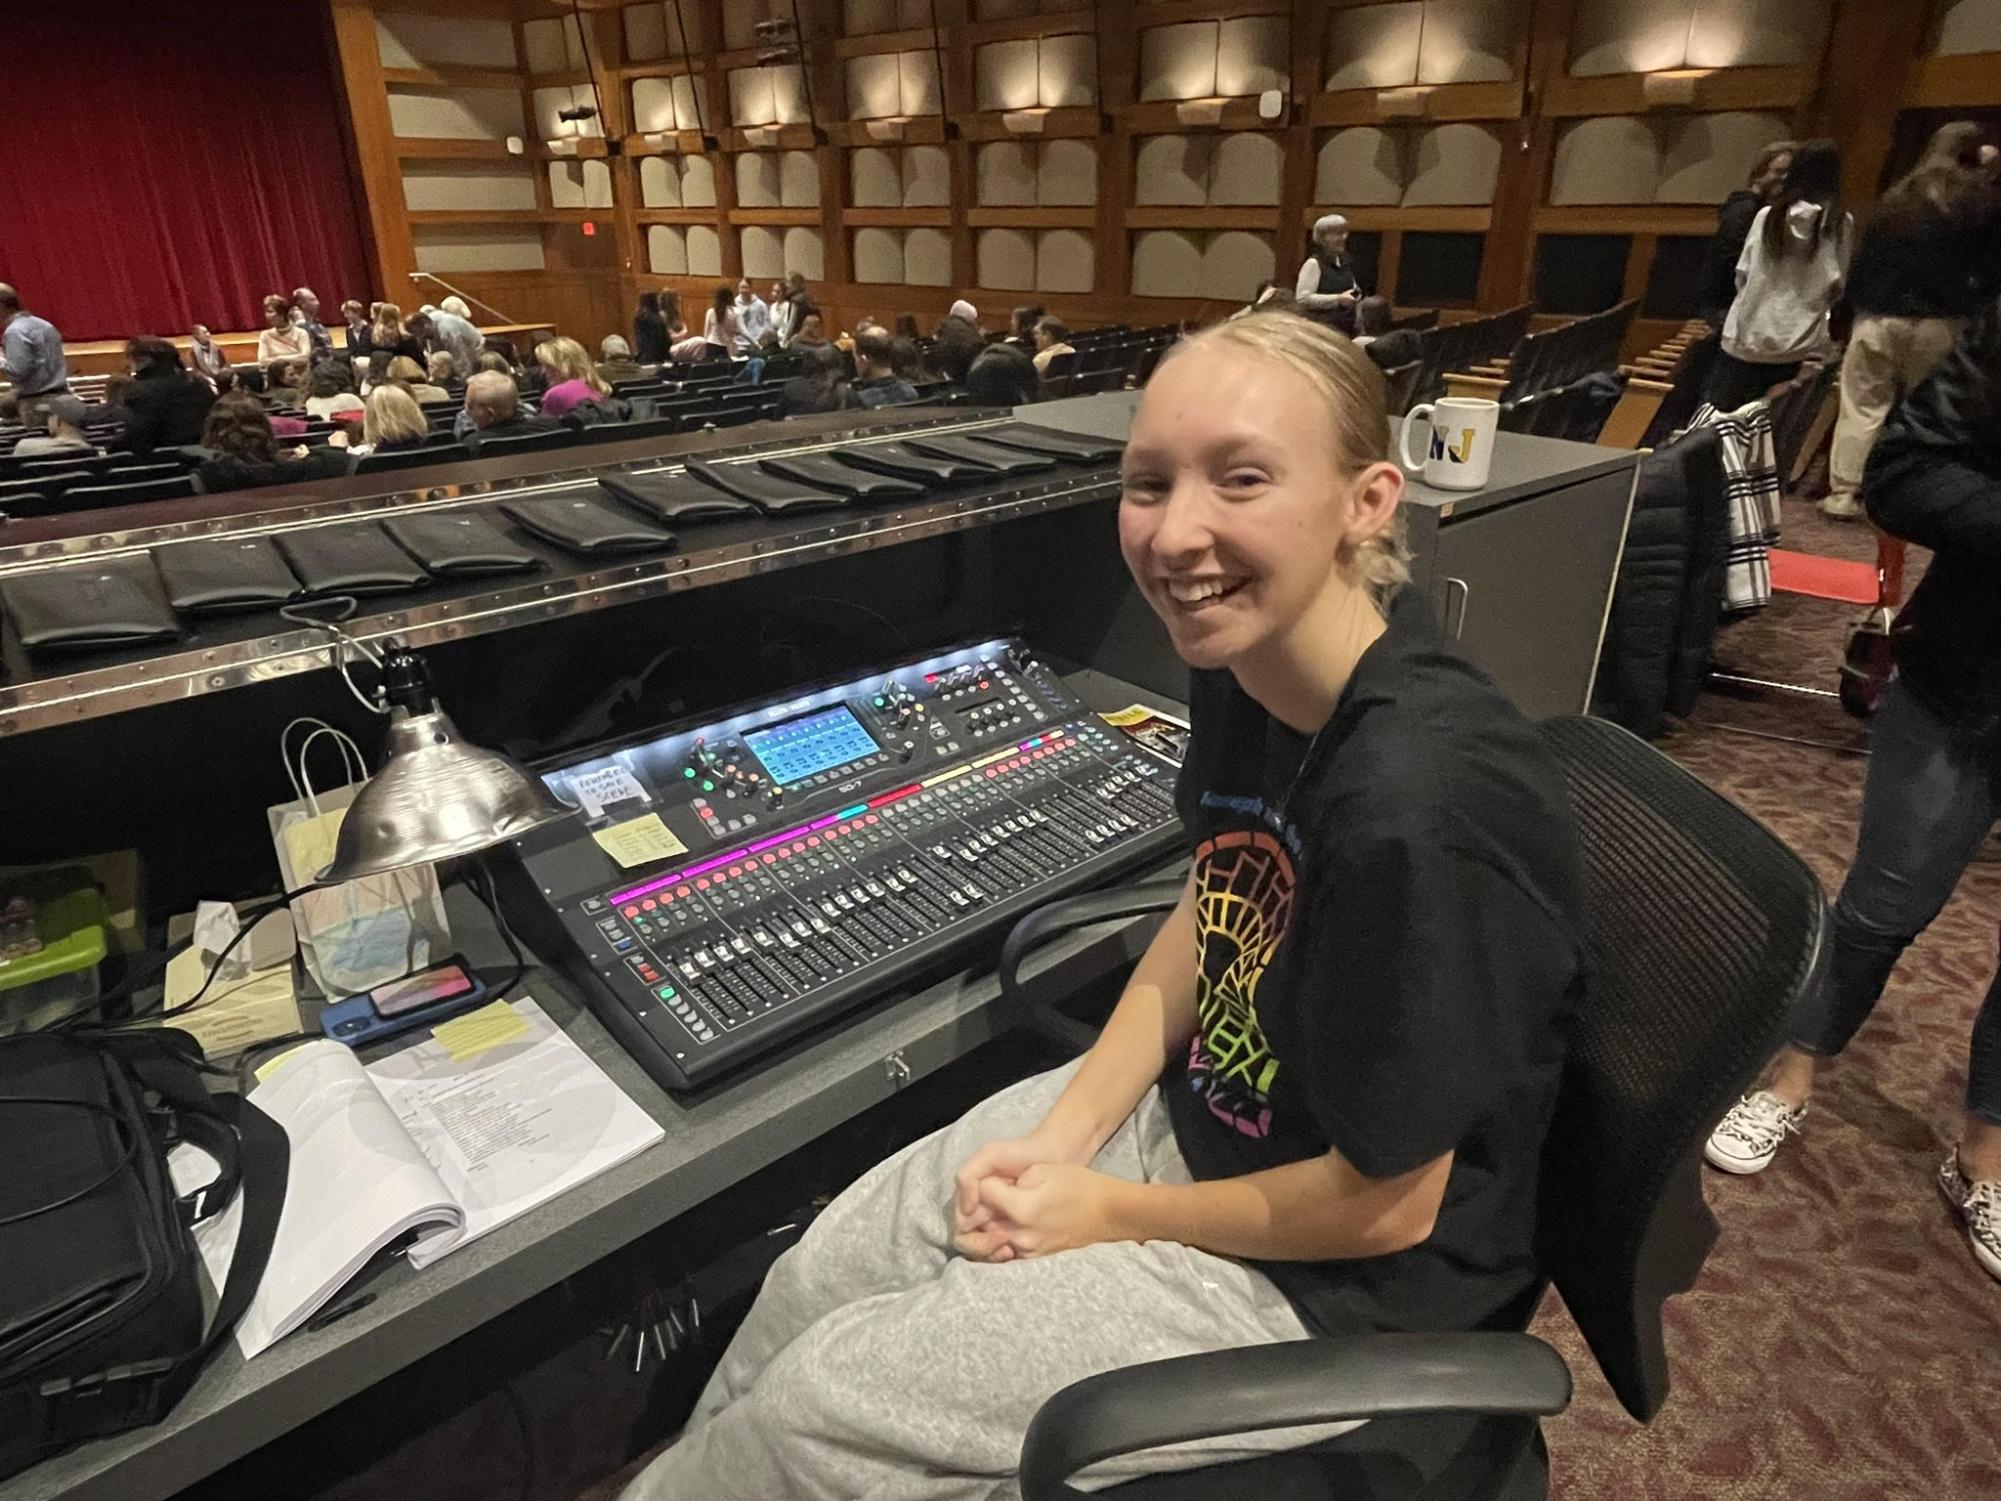 Addison Dunn sits behind and operates the soundboard for the musical